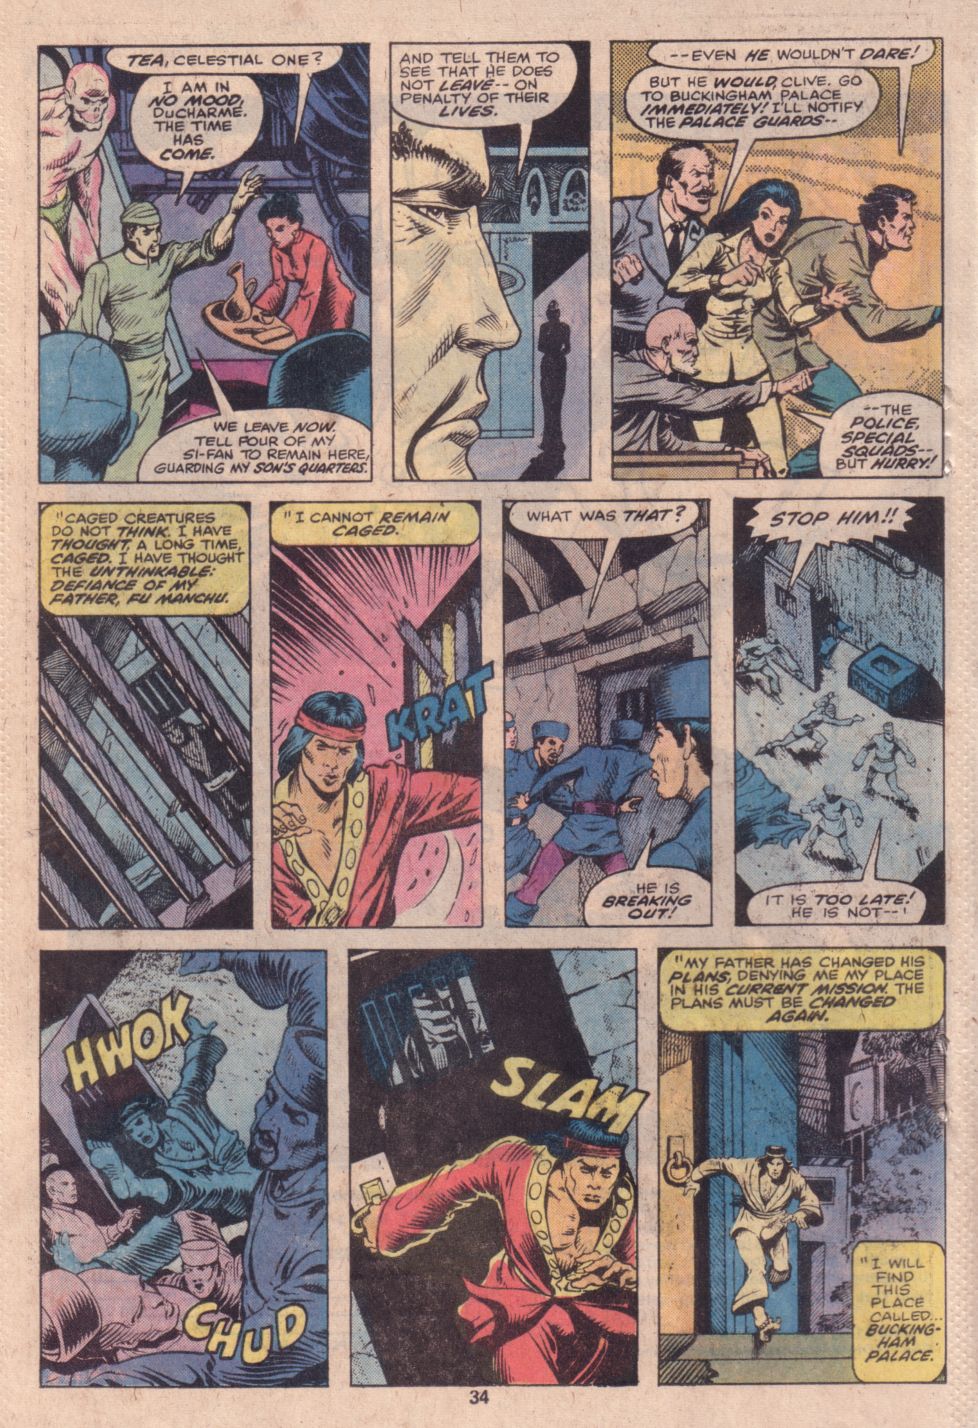 What If? (1977) issue 16 - Shang Chi Master of Kung Fu fought on The side of Fu Manchu - Page 26